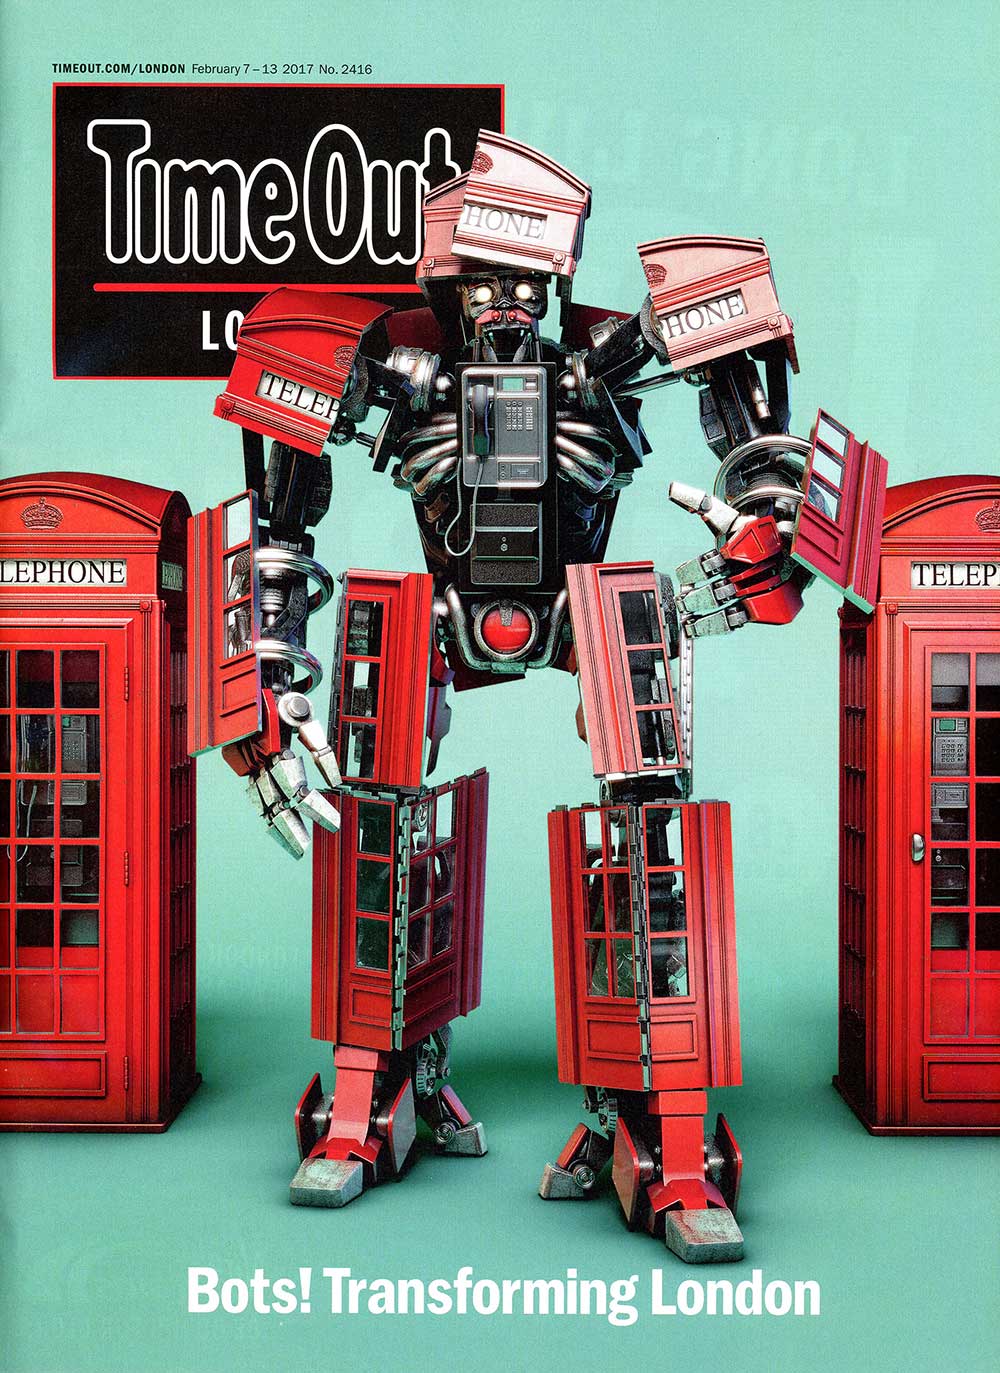 Time Out, London Feb 2017 cover